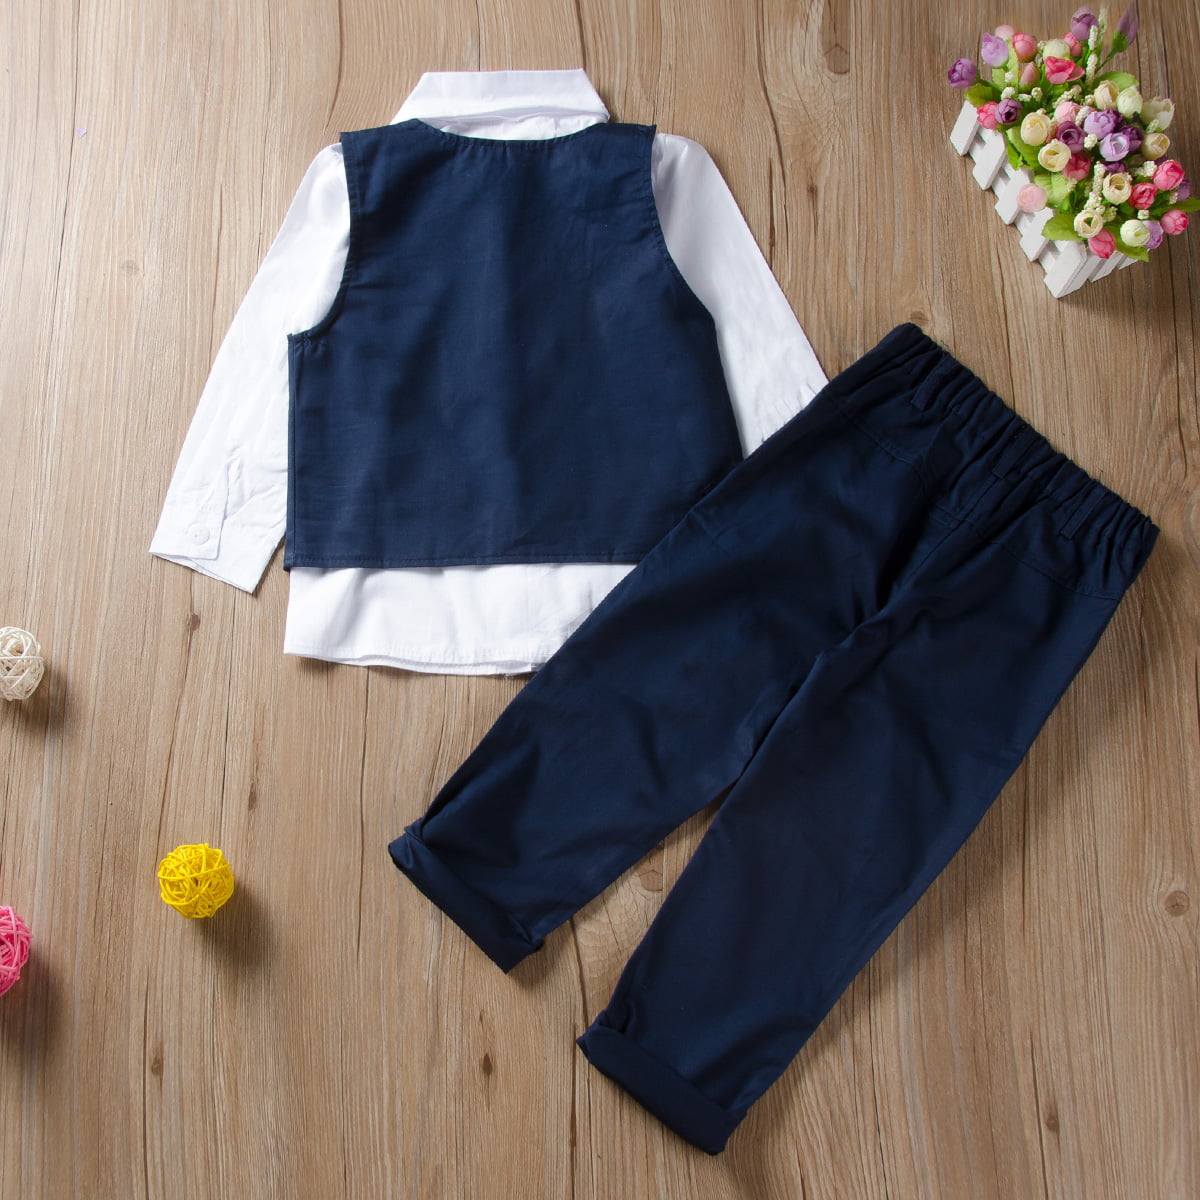 Buy Navy Captain Outfit - Formal Birthday Dress for Baby Boy